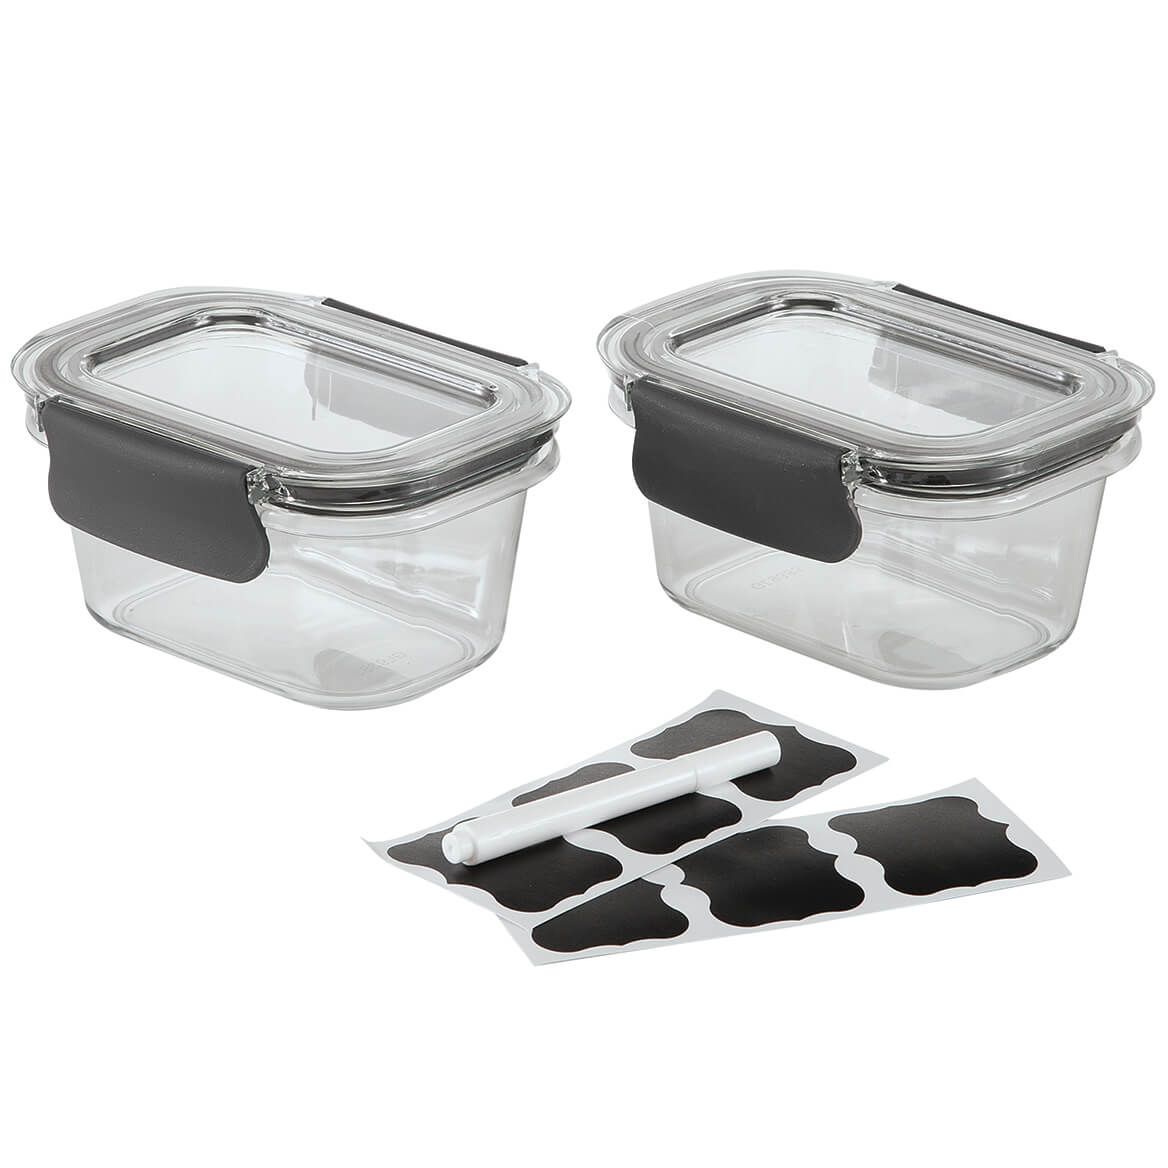 Chef's Own Small Airtight Containers, Set of 2 + '-' + 376601